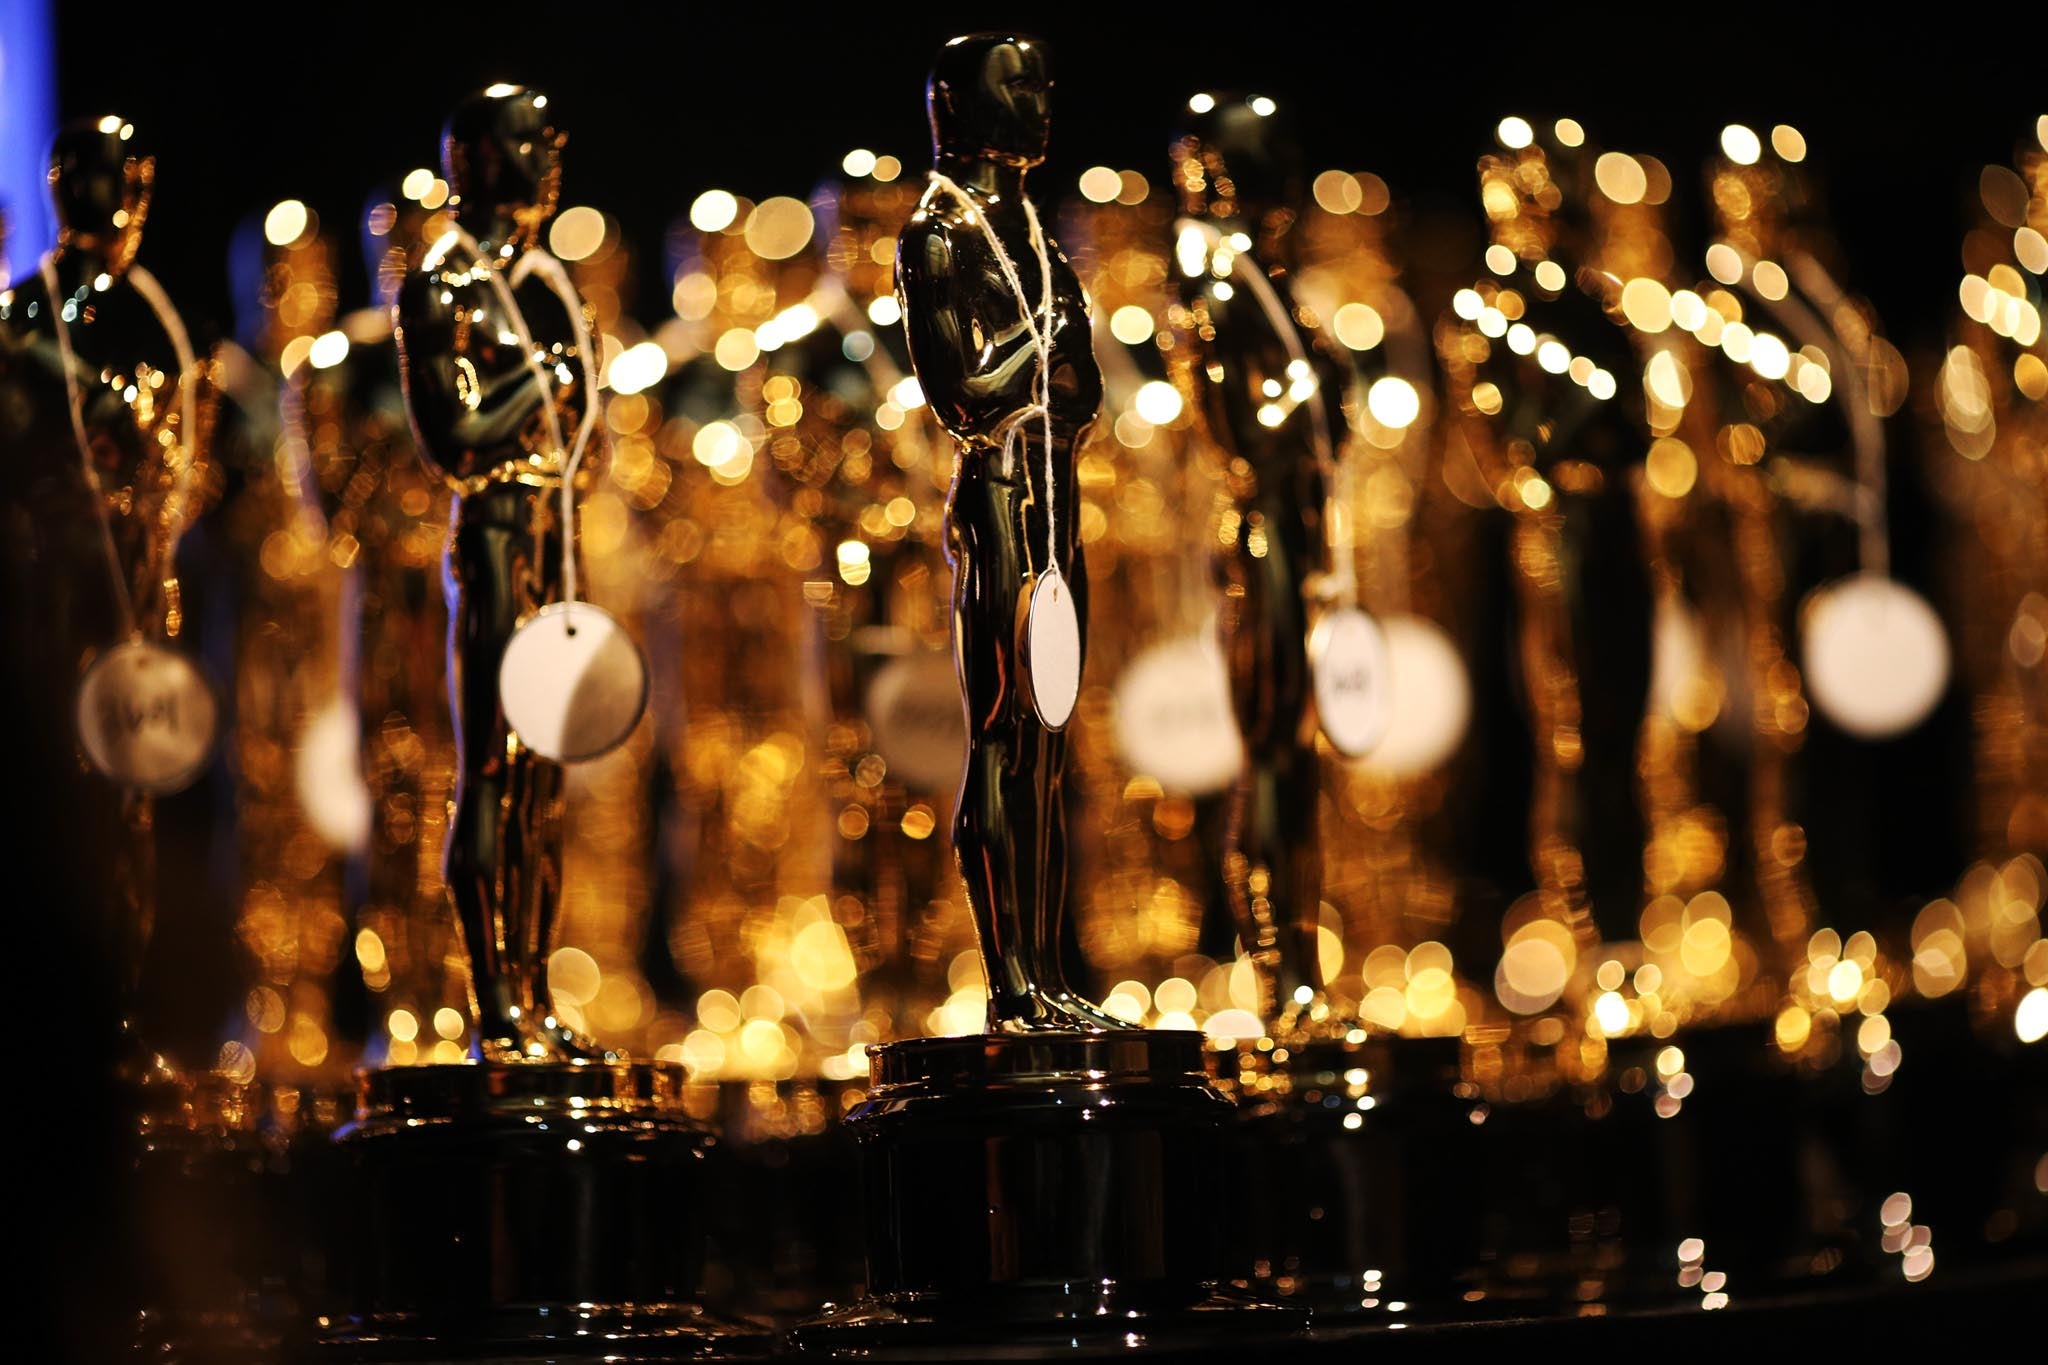 Oscars statuettes at the 2013: nominees who didn't get one still went home with $45,000 goodie bags